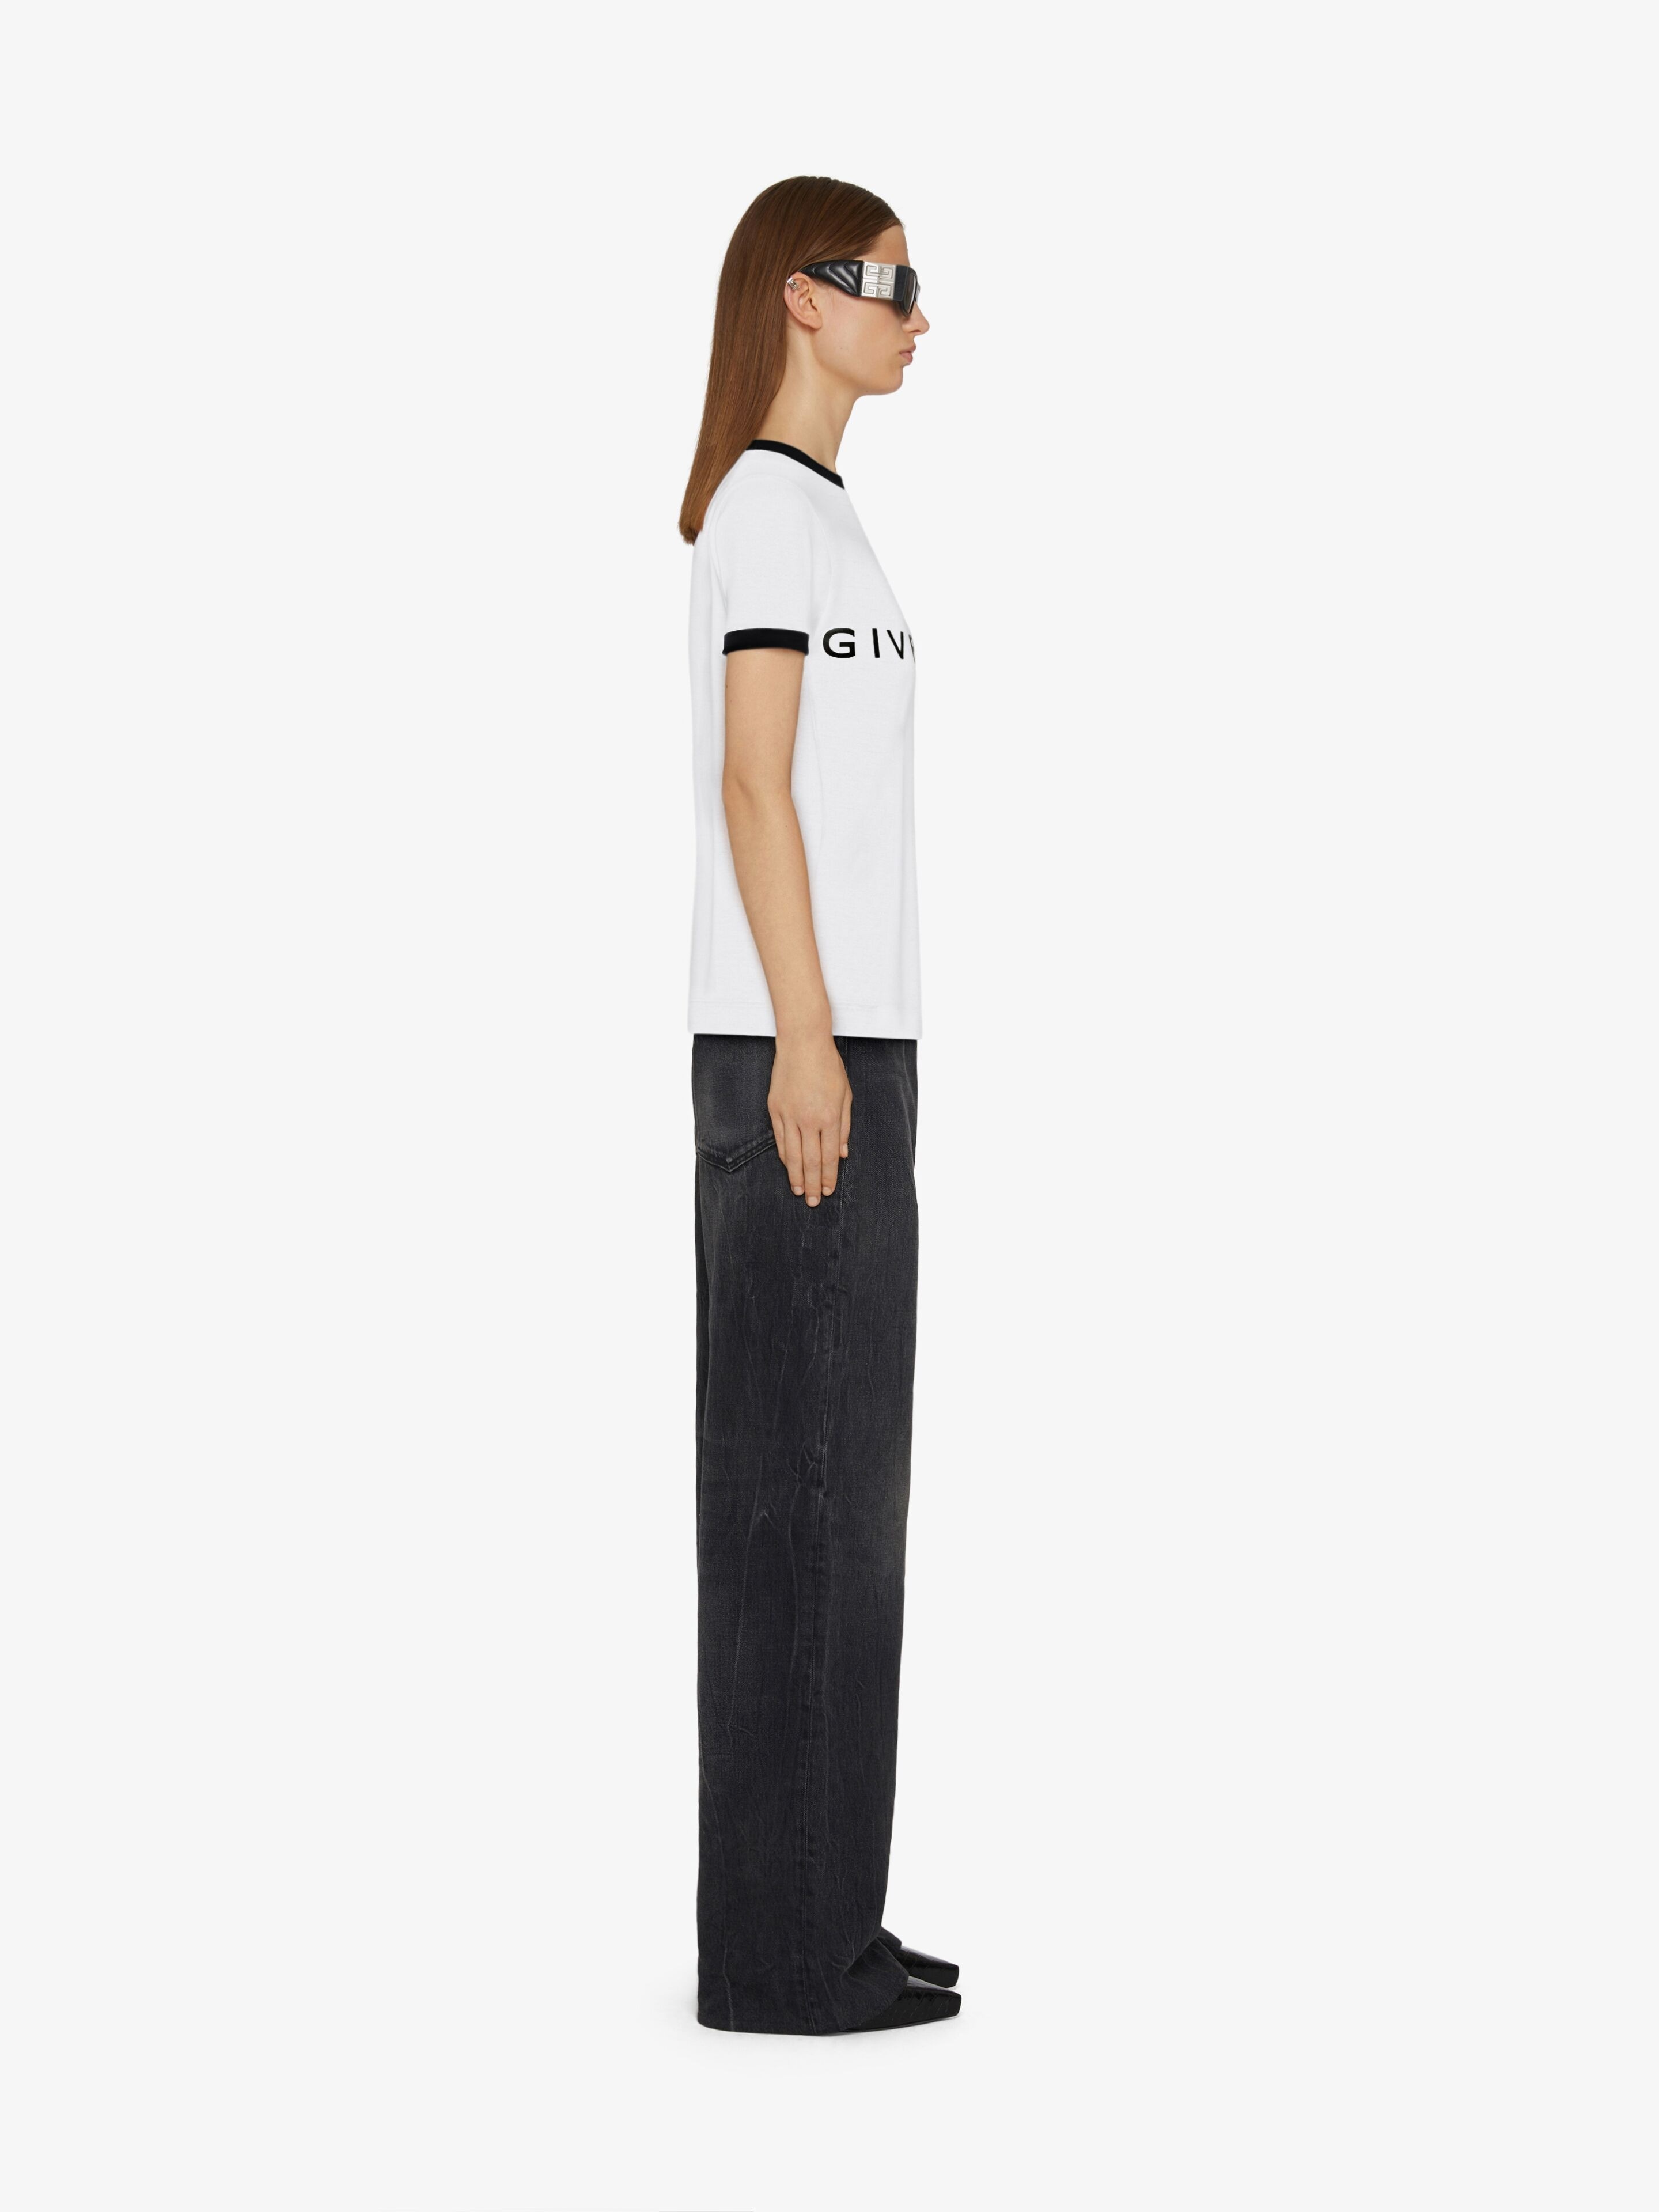 GIVENCHY SLIM FIT T-SHIRT IN COTTON - 3